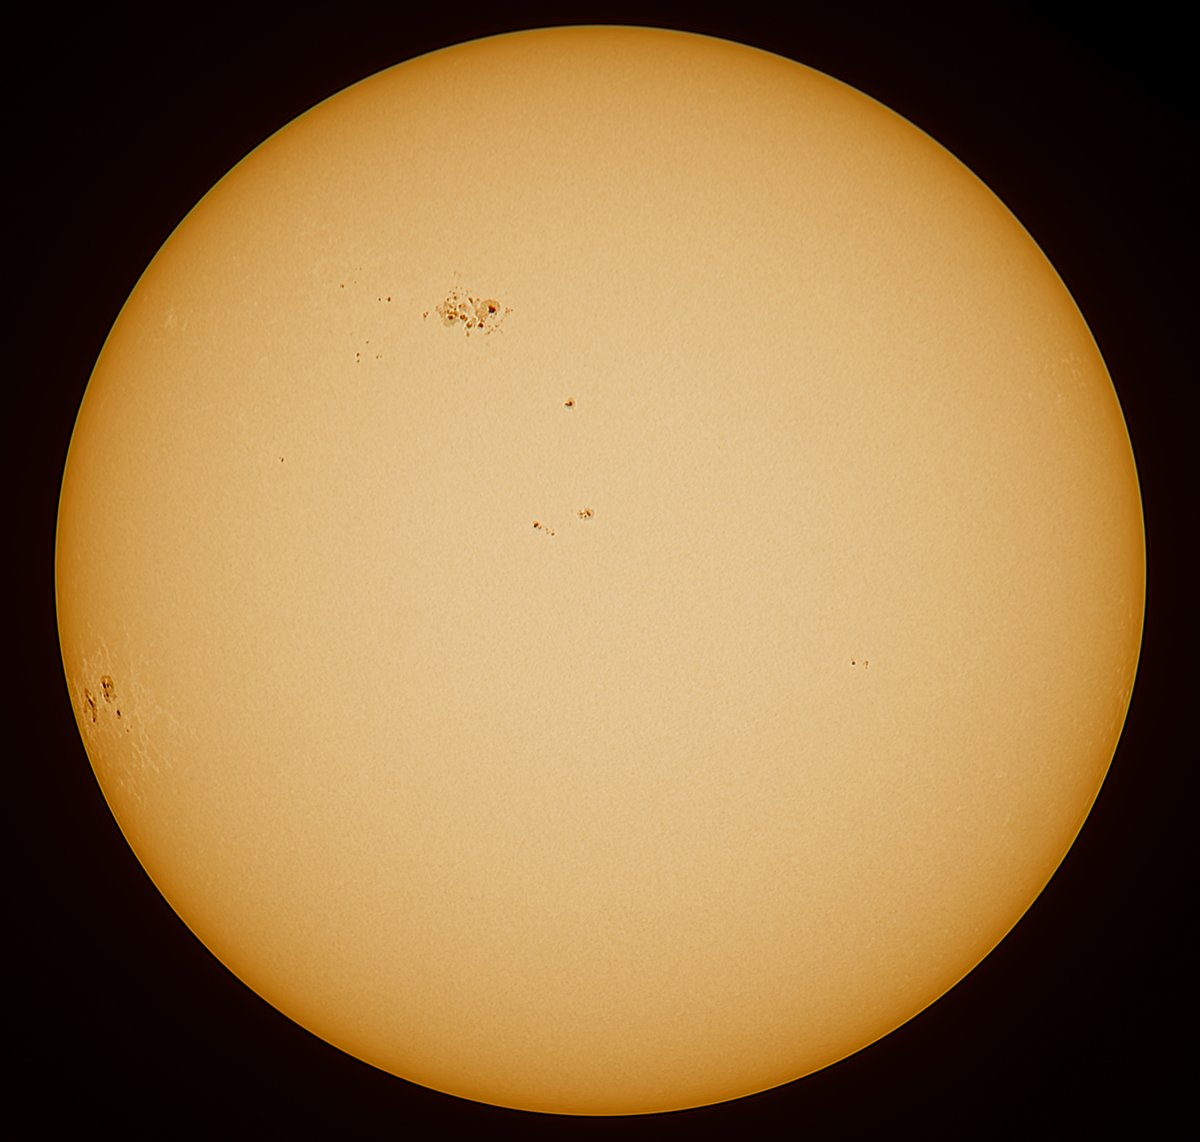 Sun today 29052024. Good to see the return of the active region that gave us the spectacular aurora as far south as Trinidad and Tobago on 10 May. It still looks buzzing on the lower east limb. #sun #solar #sunspots #sunhour #astrophotography #astronomy #stormhour #thephotohour